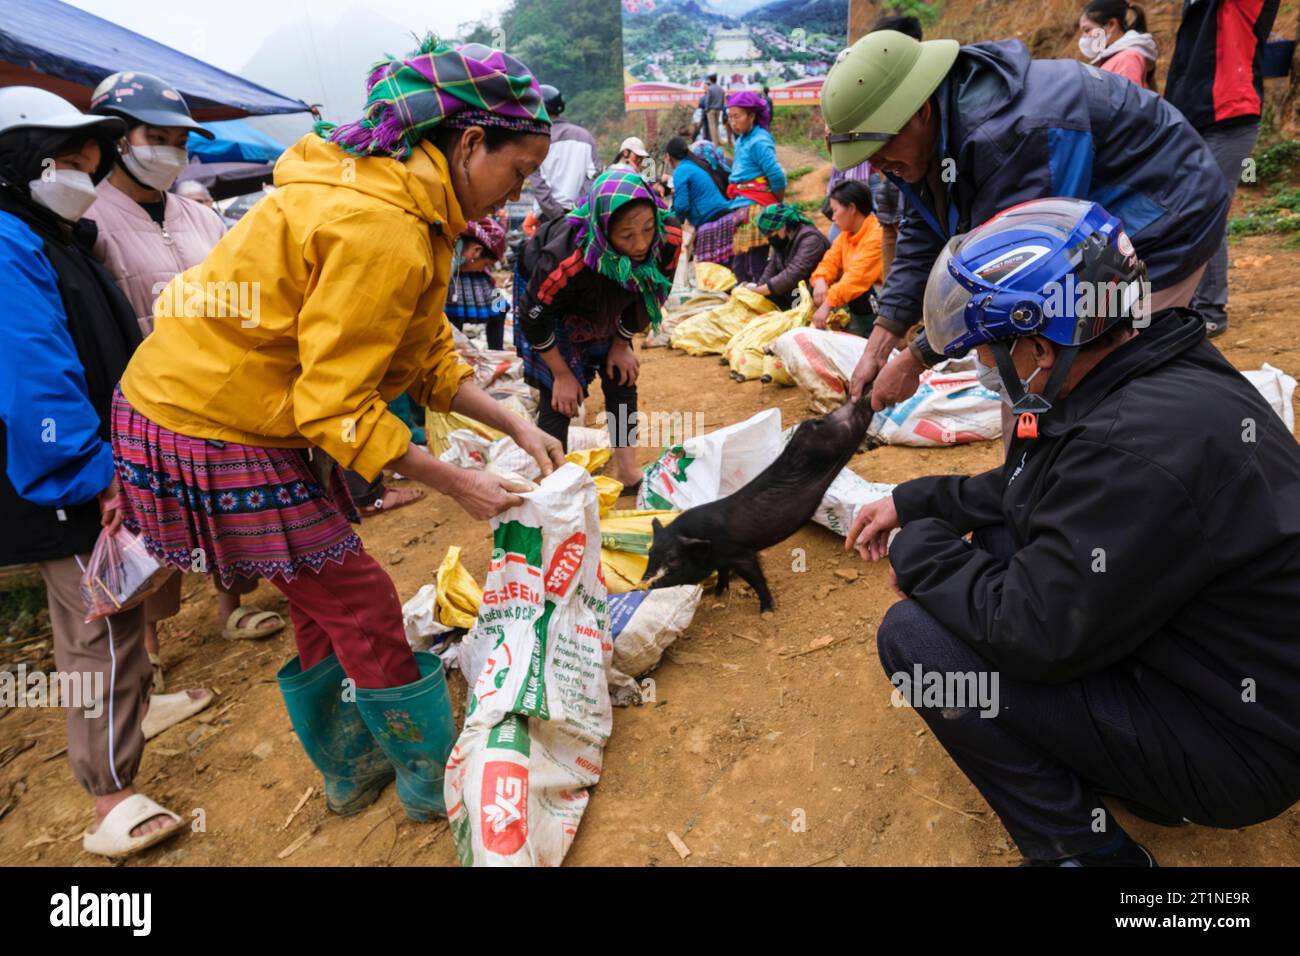 Can Cau Saturday Market, Hmong Women Selling Young Pigs. Lao Cai Province, Vietnam. Stock Photo